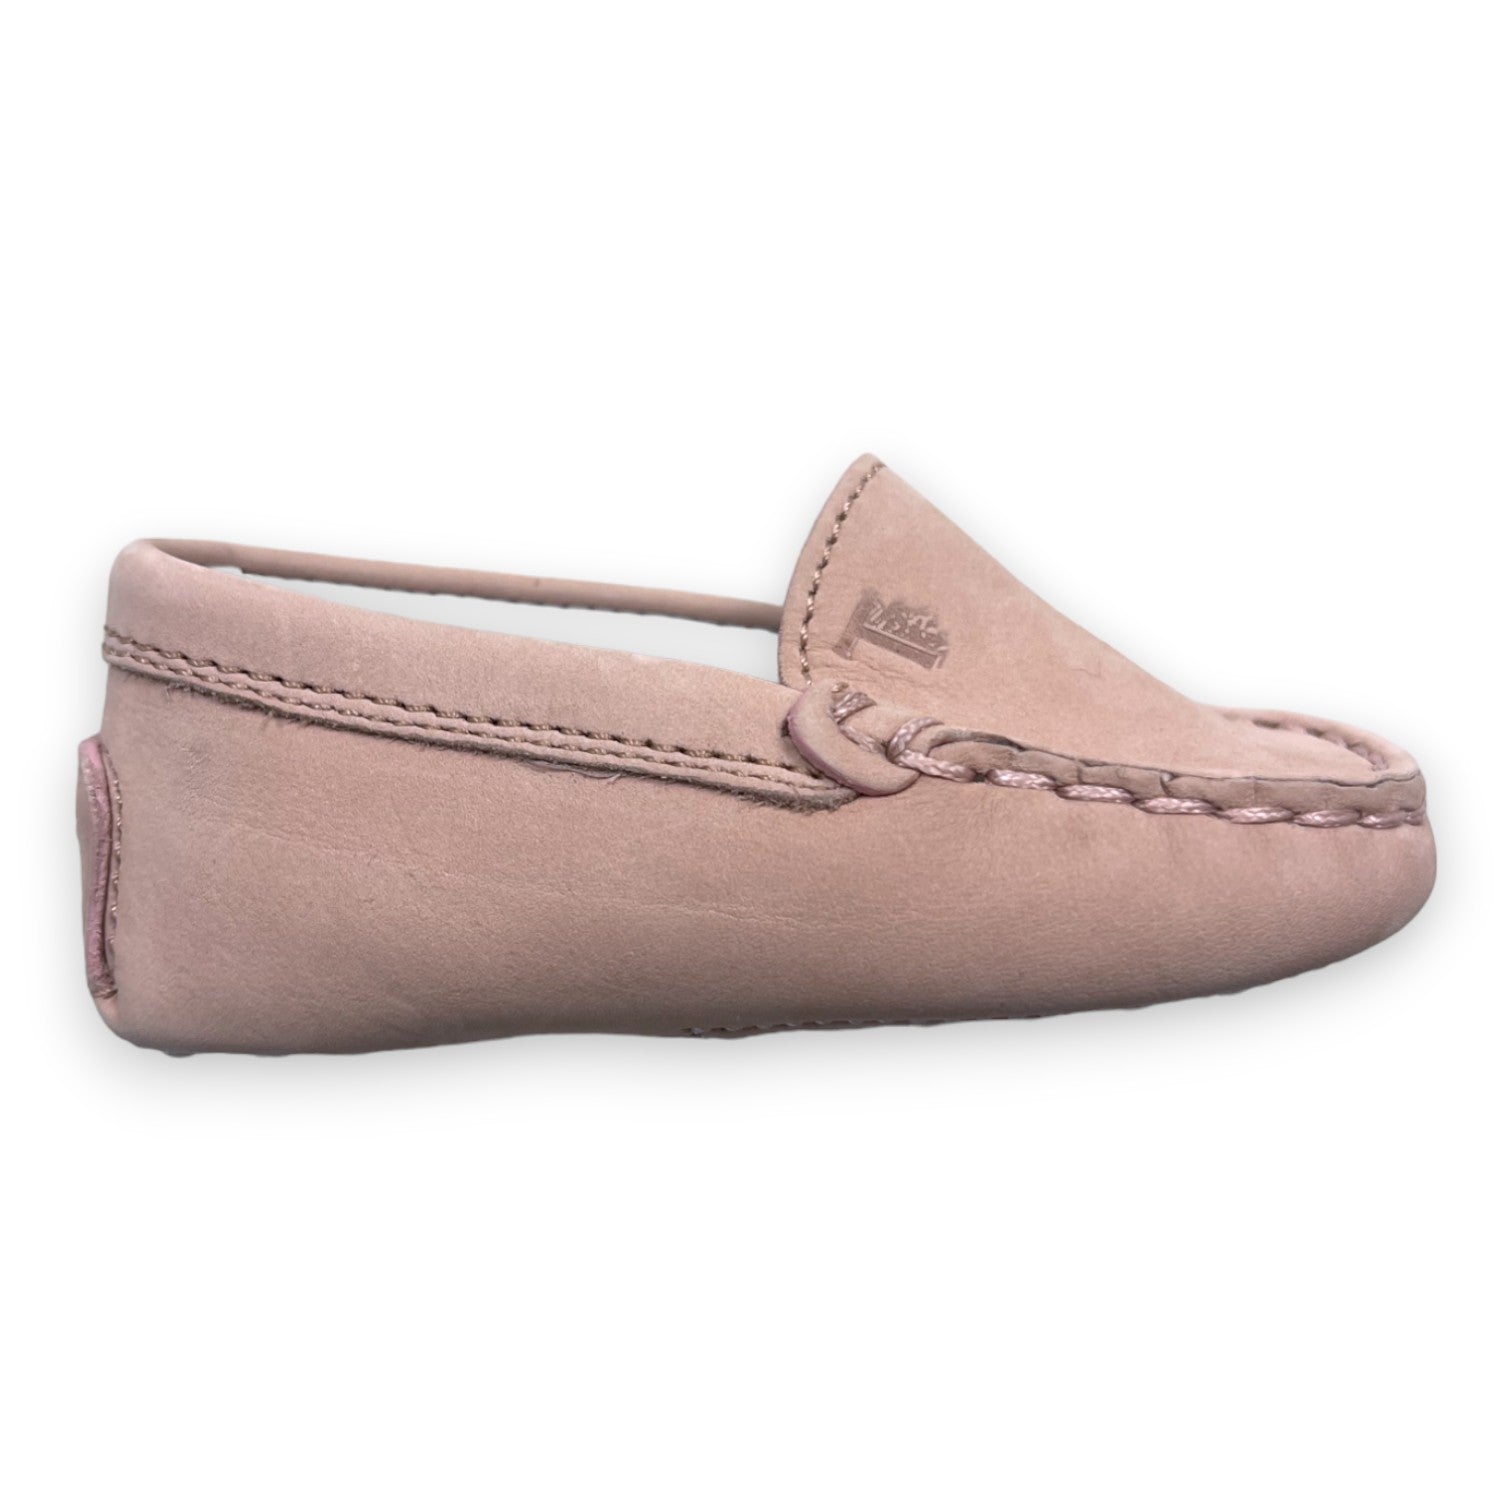 TOD'S - Chaussons roses - 17